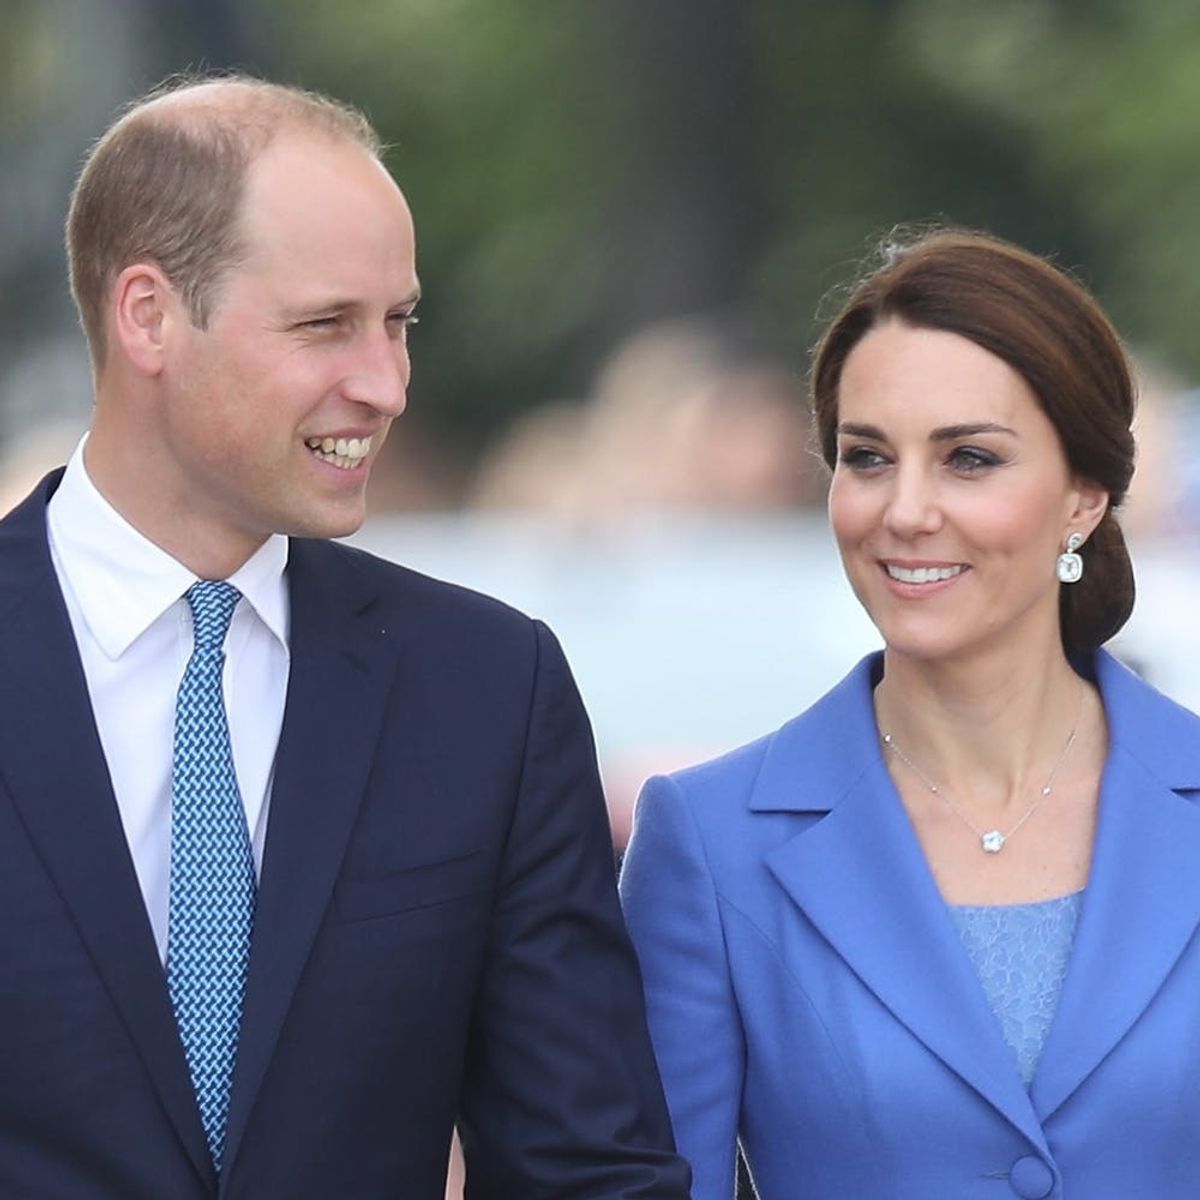 Prince William and Duchess Kate’s Baby Will Have a Very Long and Very Regal Official Royal Title